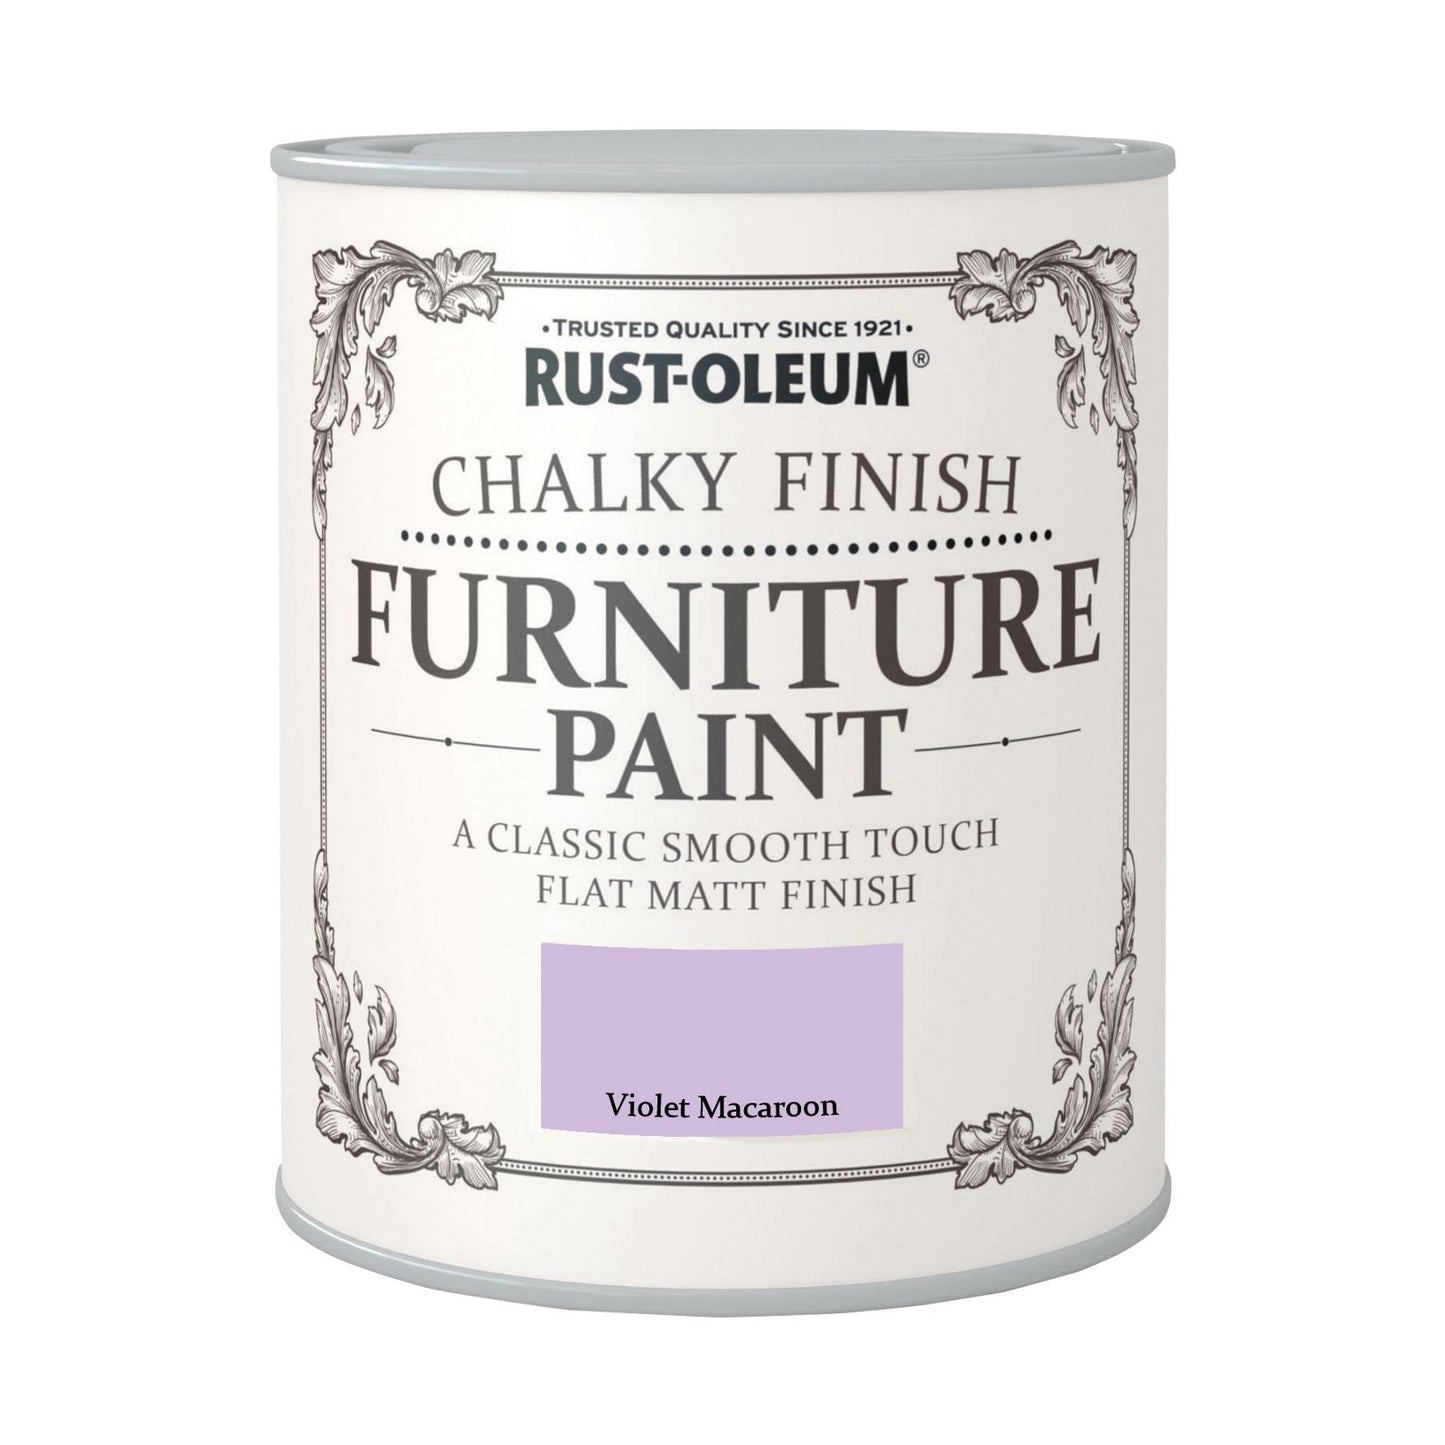 Rust-Oleum Chalky Finish Furniture Paint Violet Macaroon